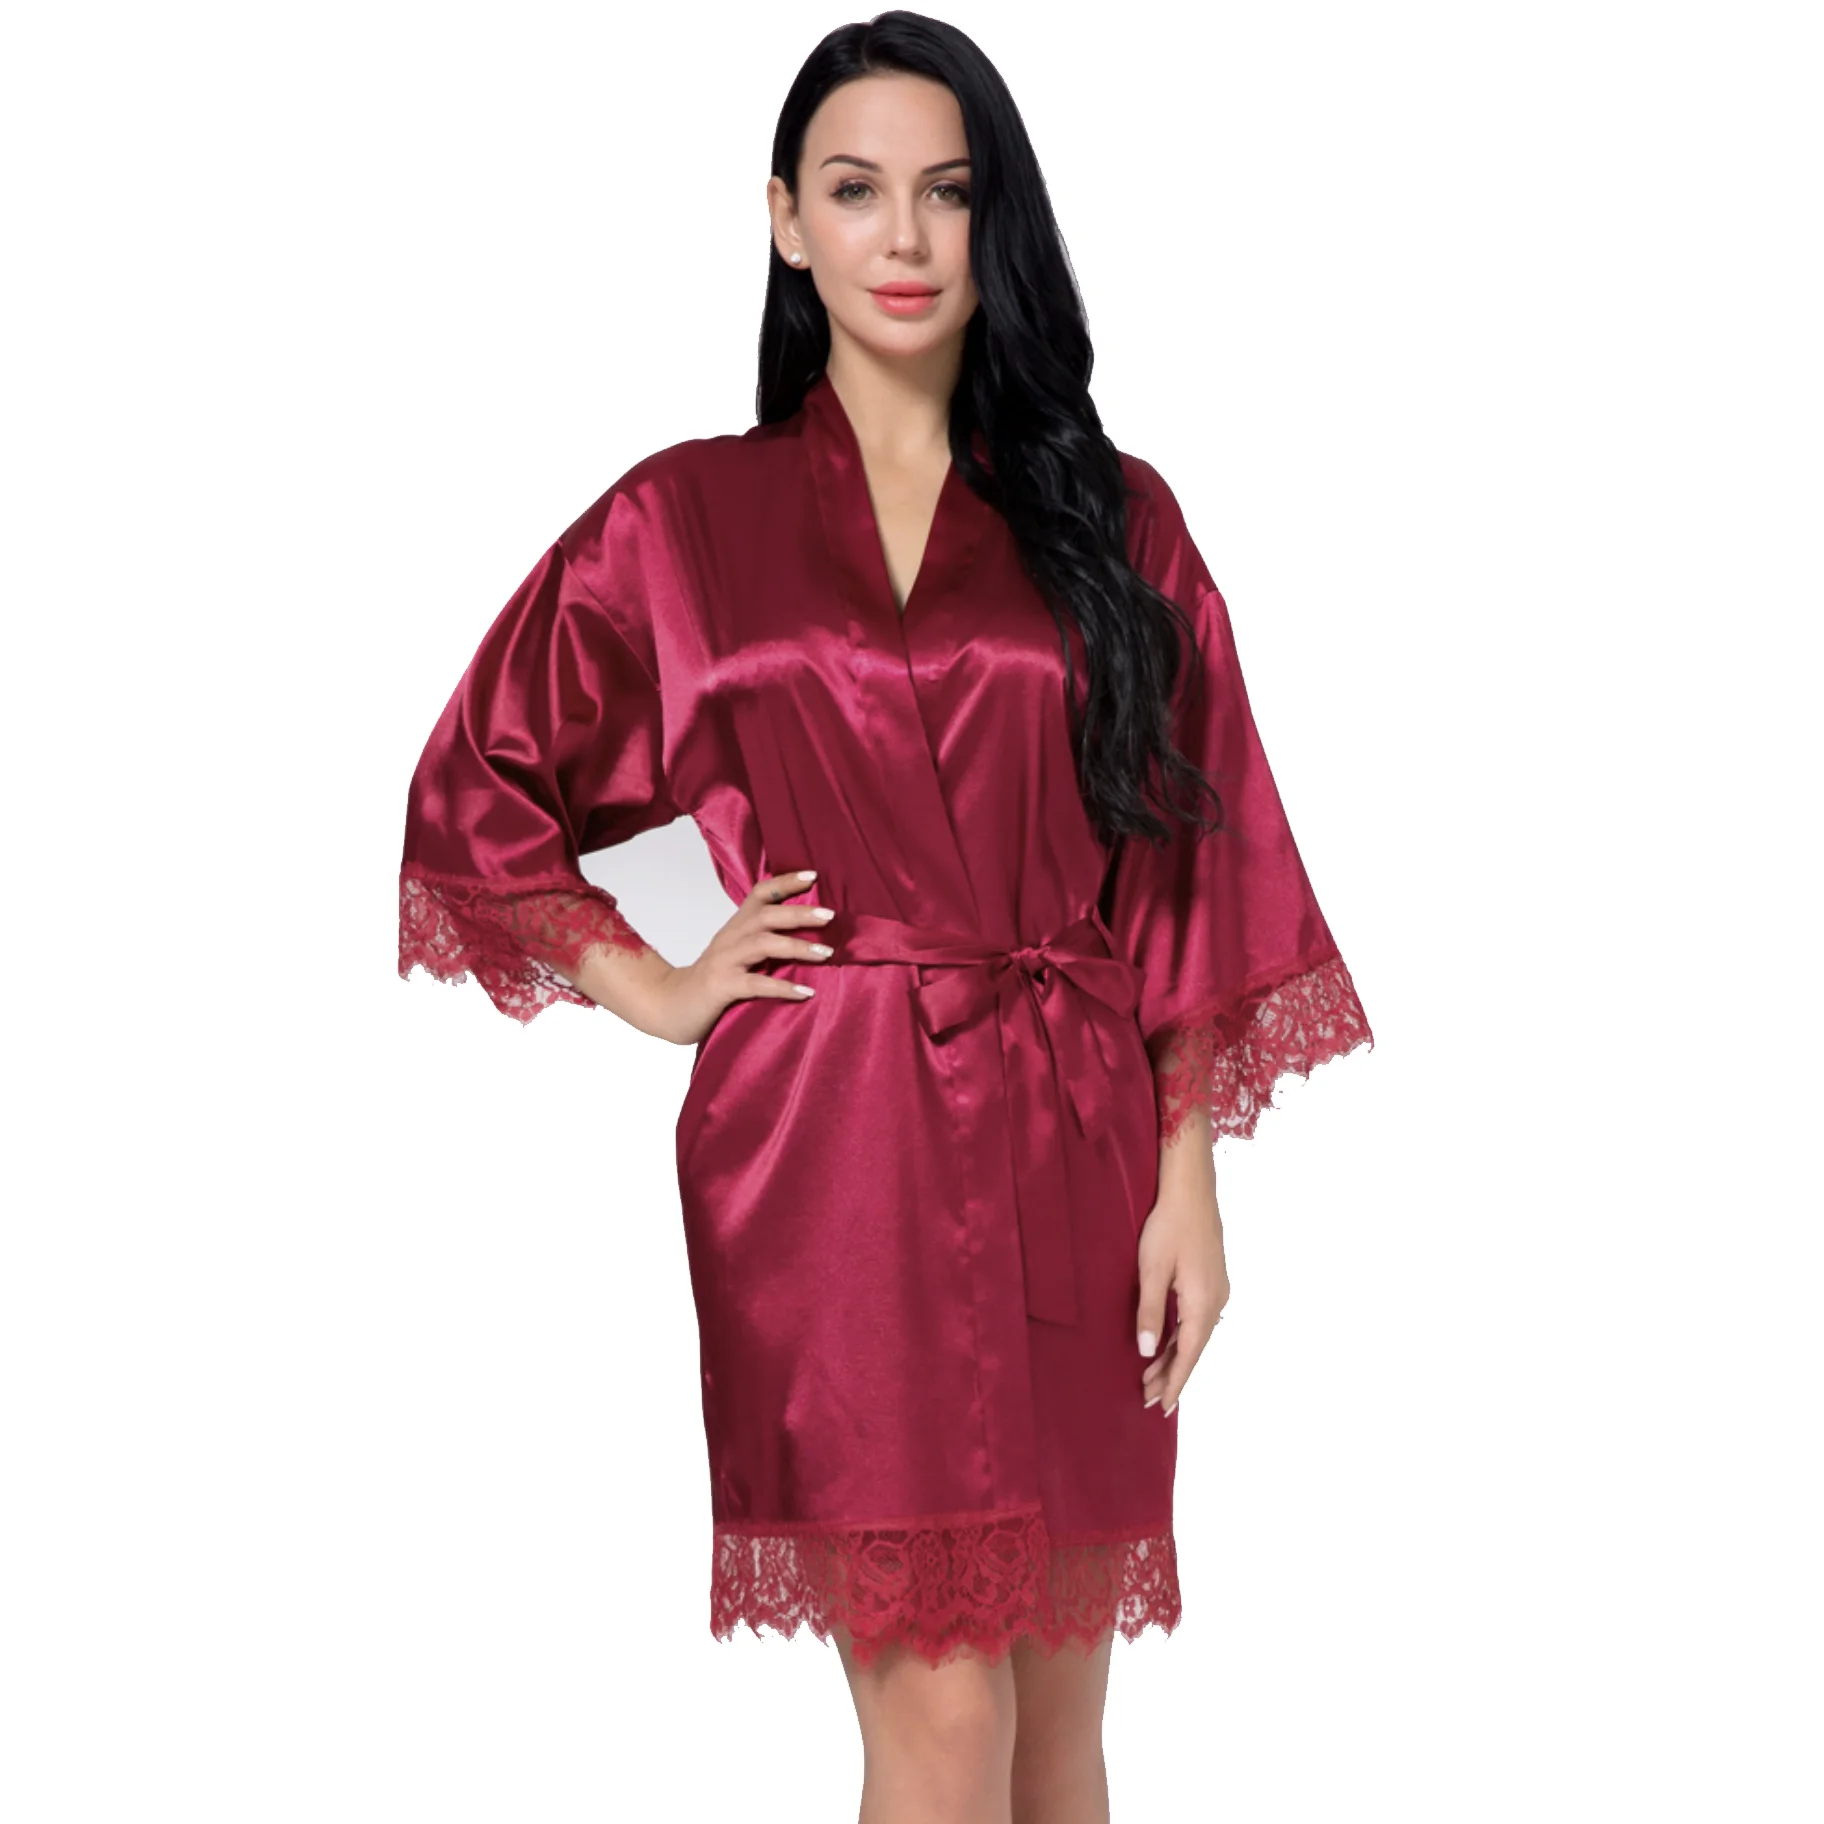 

New Wholesale Romper Sleepwear Sexy Silky Robe Femme Pajamas Satin Robe With Lace, Navy blue, rose gold, black, blue, burgundy, pink...